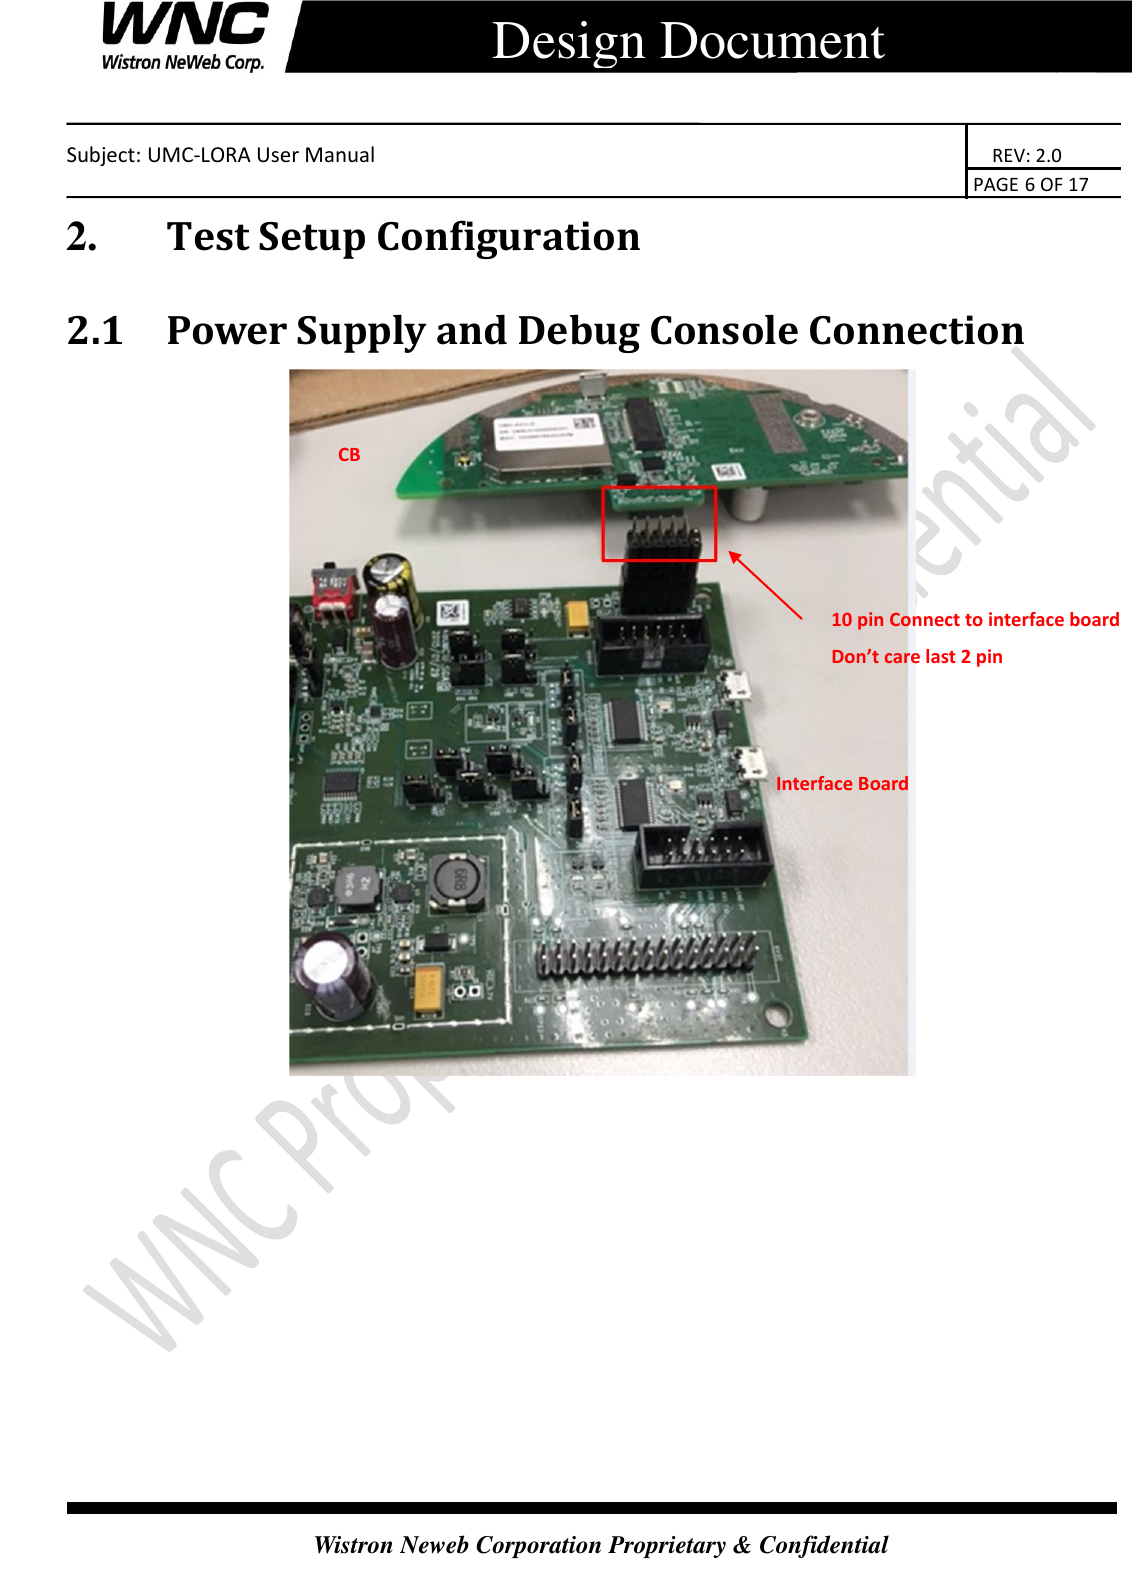    Subject: UMC-LORA User Manual                                                                      REV: 2.0                                                                                        PAGE 6 OF 17  Wistron Neweb Corporation Proprietary &amp; Confidential      Design Document 2.       Test Setup Configuration 2.1 Power Supply and Debug Console Connection  10 pin Connect to interface board Don’t care last 2 pin CB Interface Board   